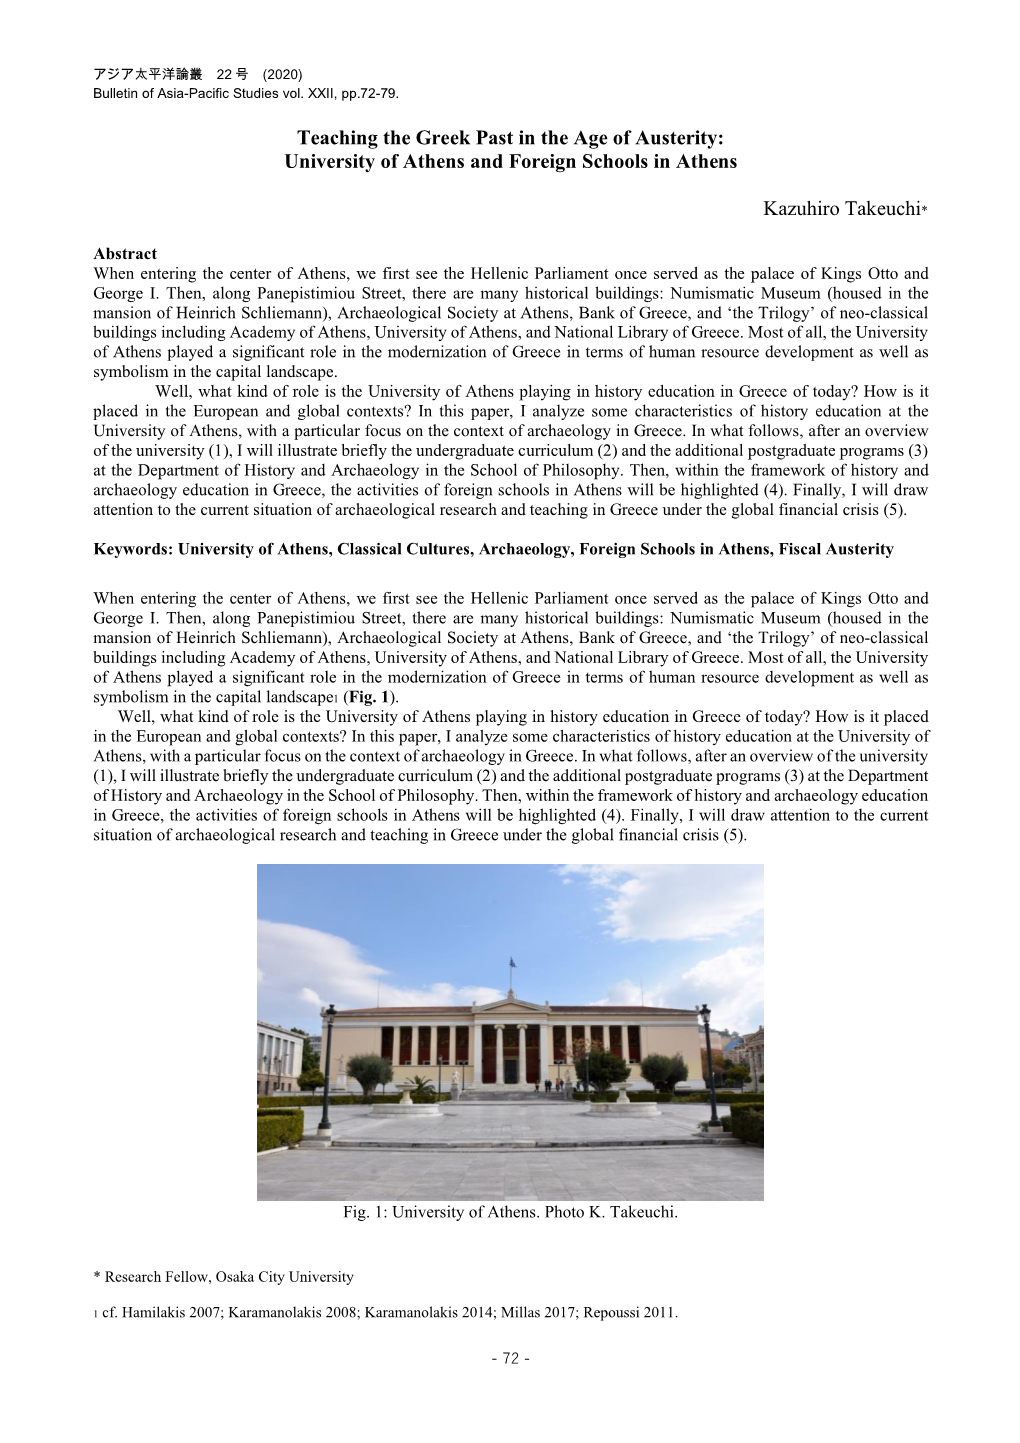 Teaching the Greek Past in the Age of Austerity: University of Athens and Foreign Schools in Athens